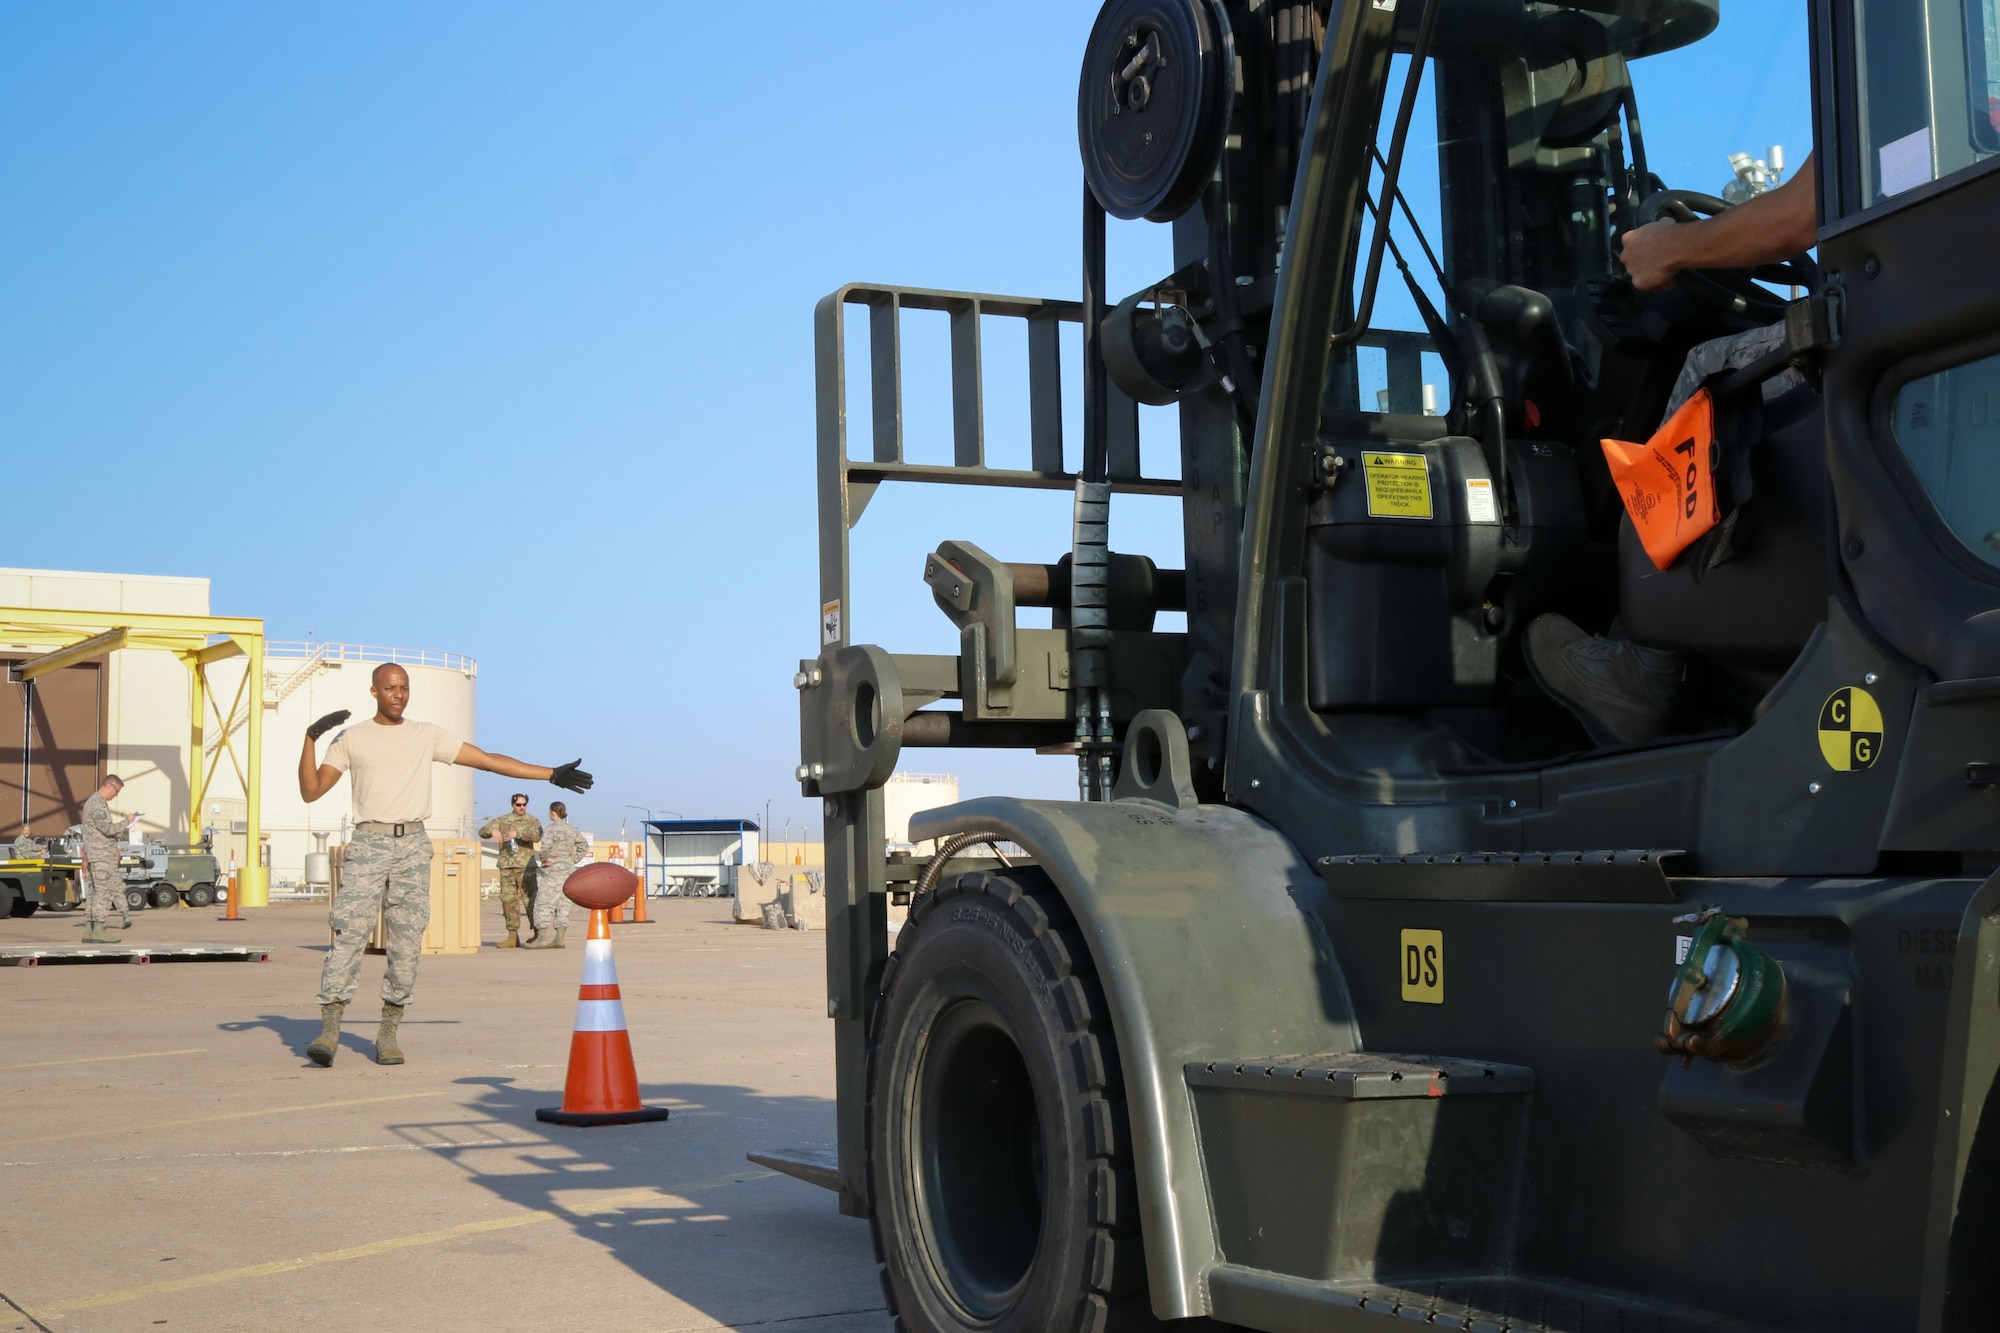 Senior Airman Samuel Lee, 72nd Aerial Port Squadron aerial transportation specialist, directs a forklifft during a rodeo, Sept. 6, 2019, at Tinker Air Force Base, Oklahoma. The rodeo incorporated various jobs competed by aerial port in a fun and competitive atmosphere. (U.S. Air Force photo by Senior Airman Mary Begy)